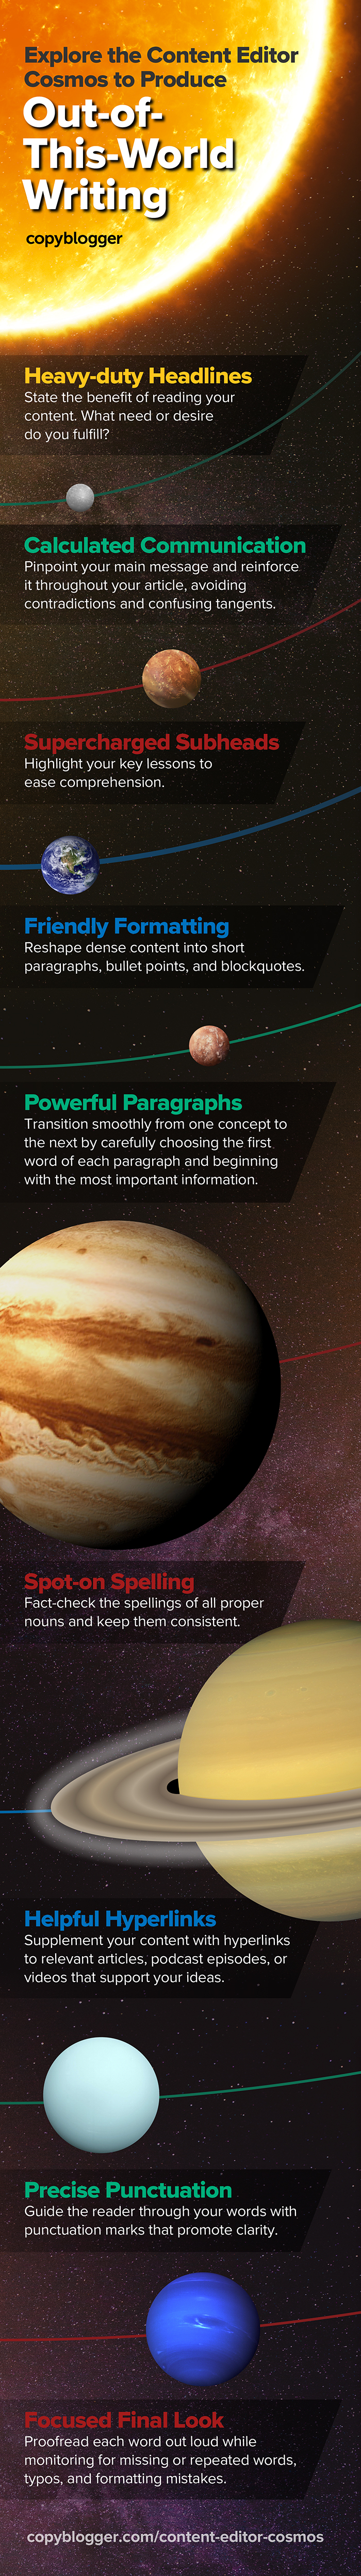 Explore the Content Editor Cosmos to Produce Out-of-This-World Writing [Infographic]